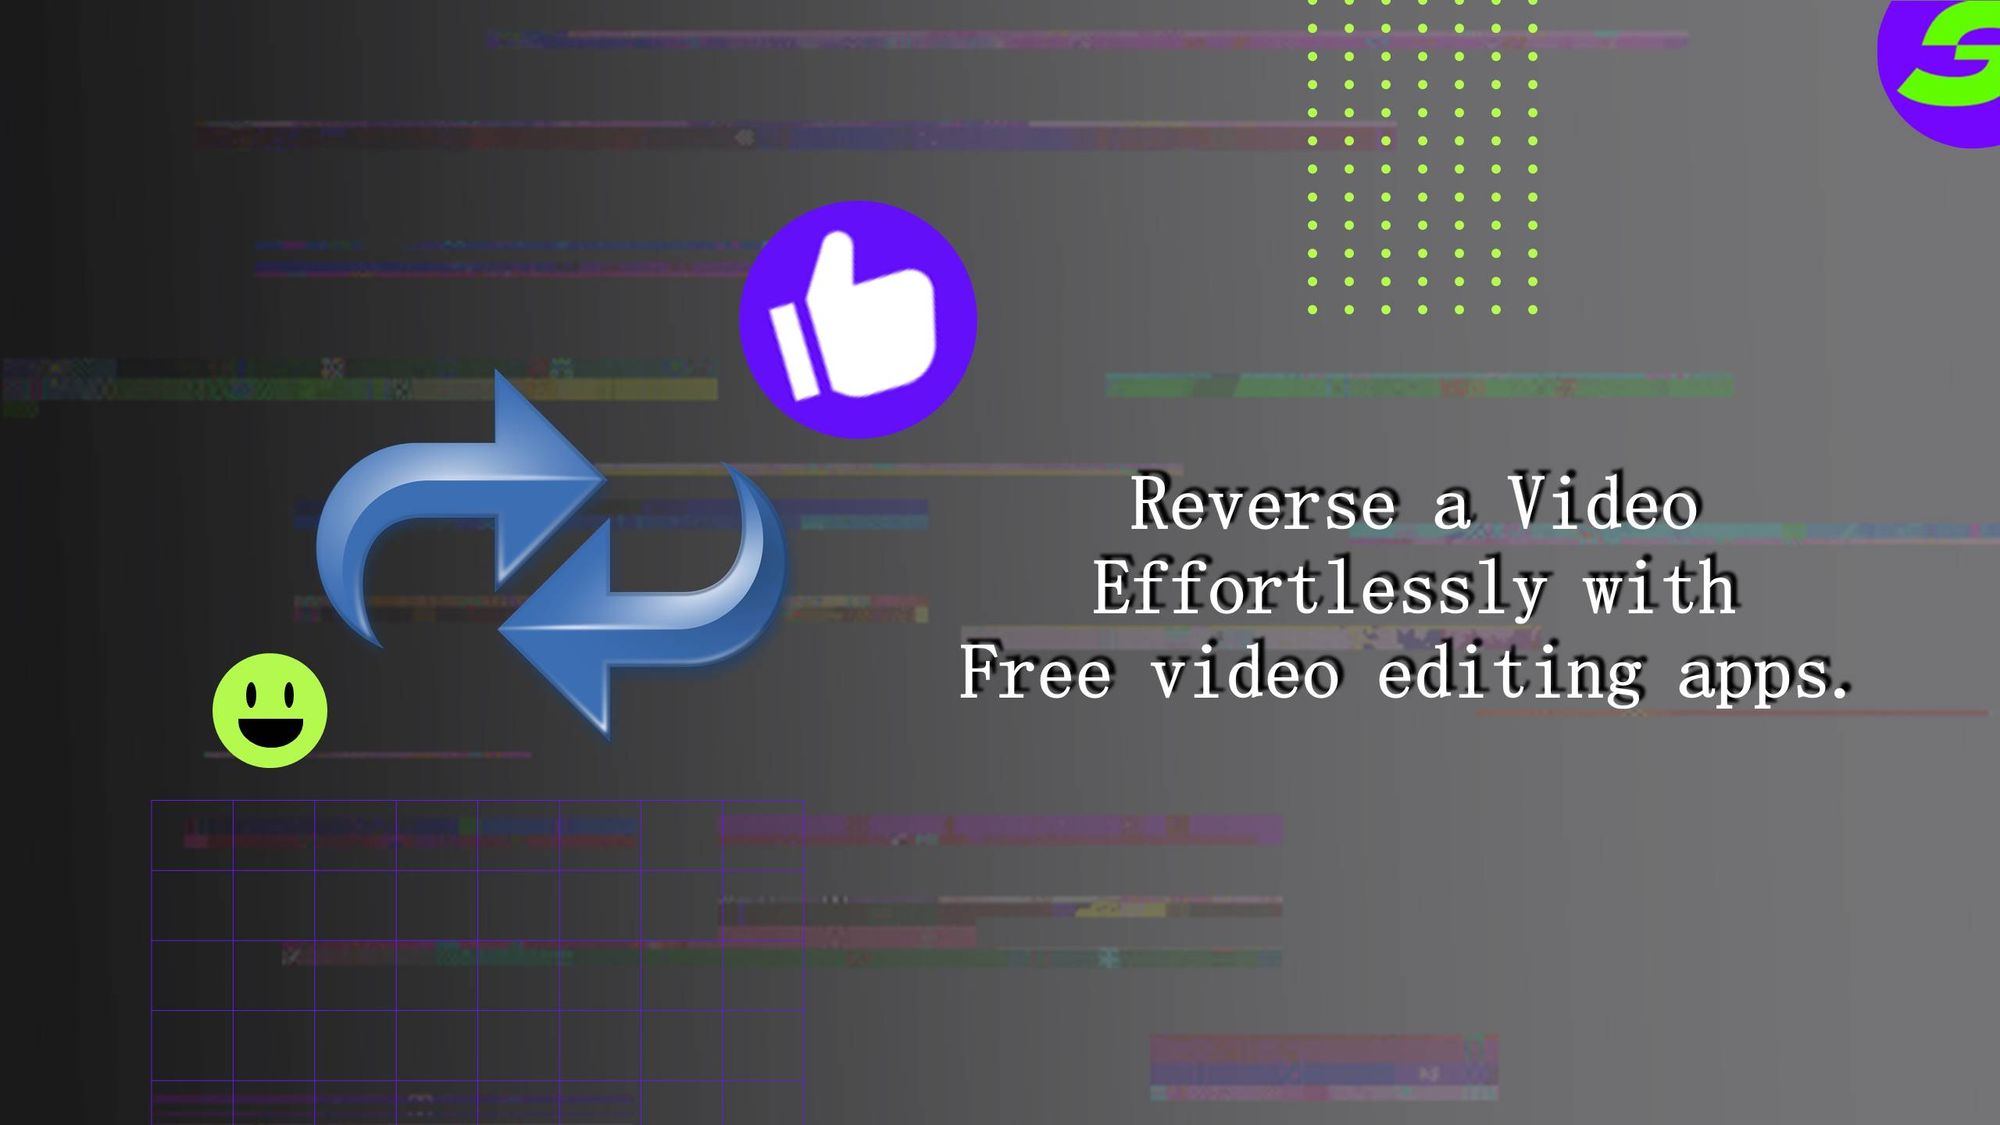 Reverse a video quickly and easily with ShotCut Free video editor.